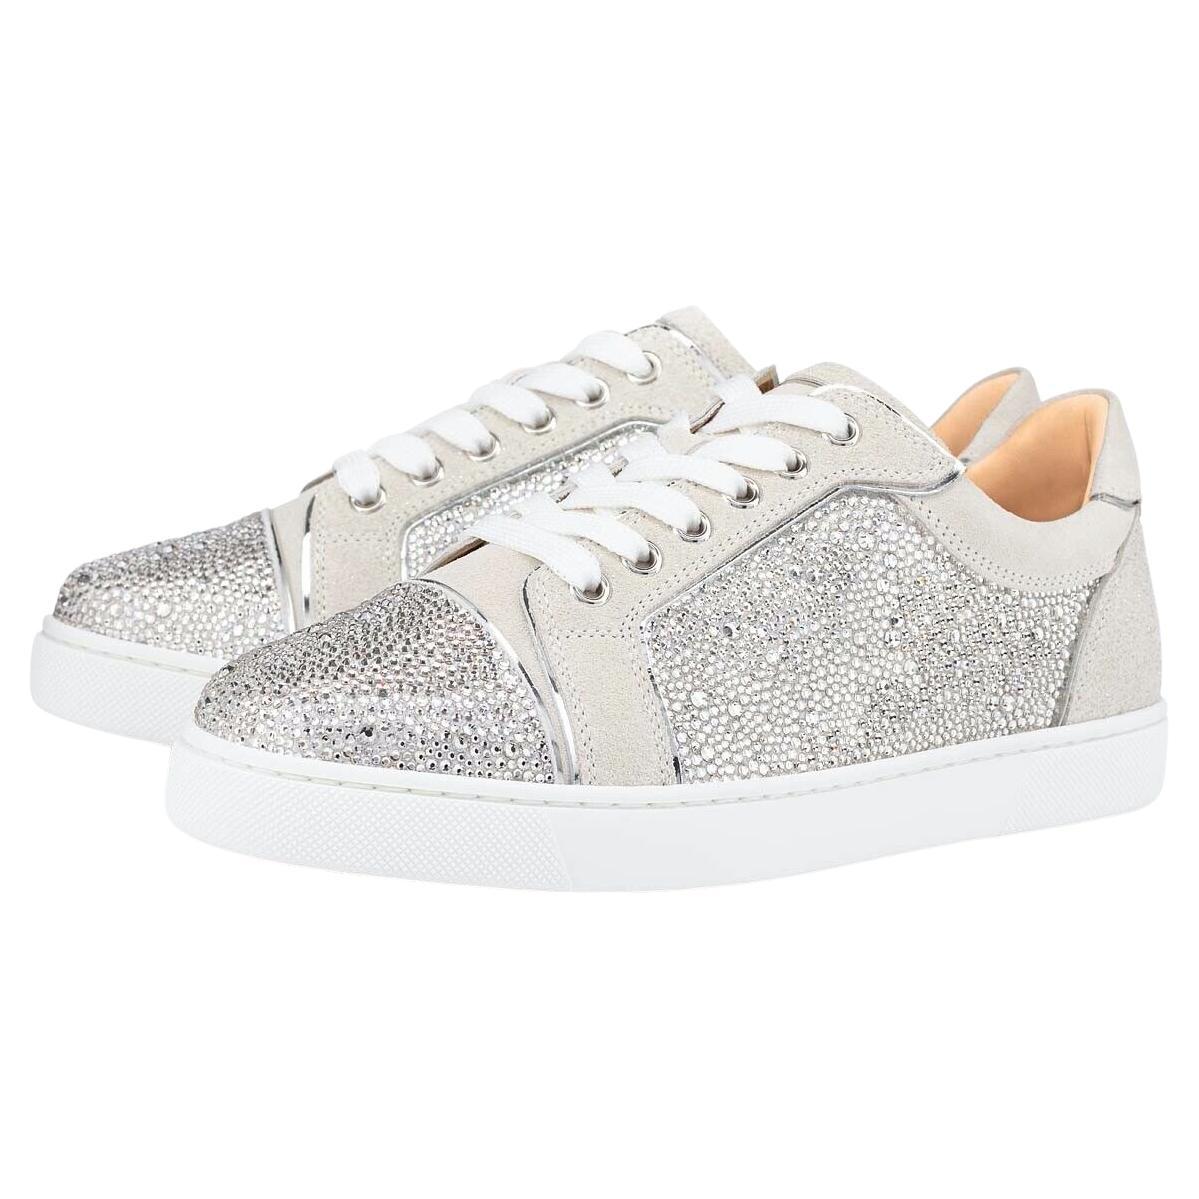 Christian Louboutin Viera Strass Flat Lune Grey Crystal Sneakers Sz 41 For Sale